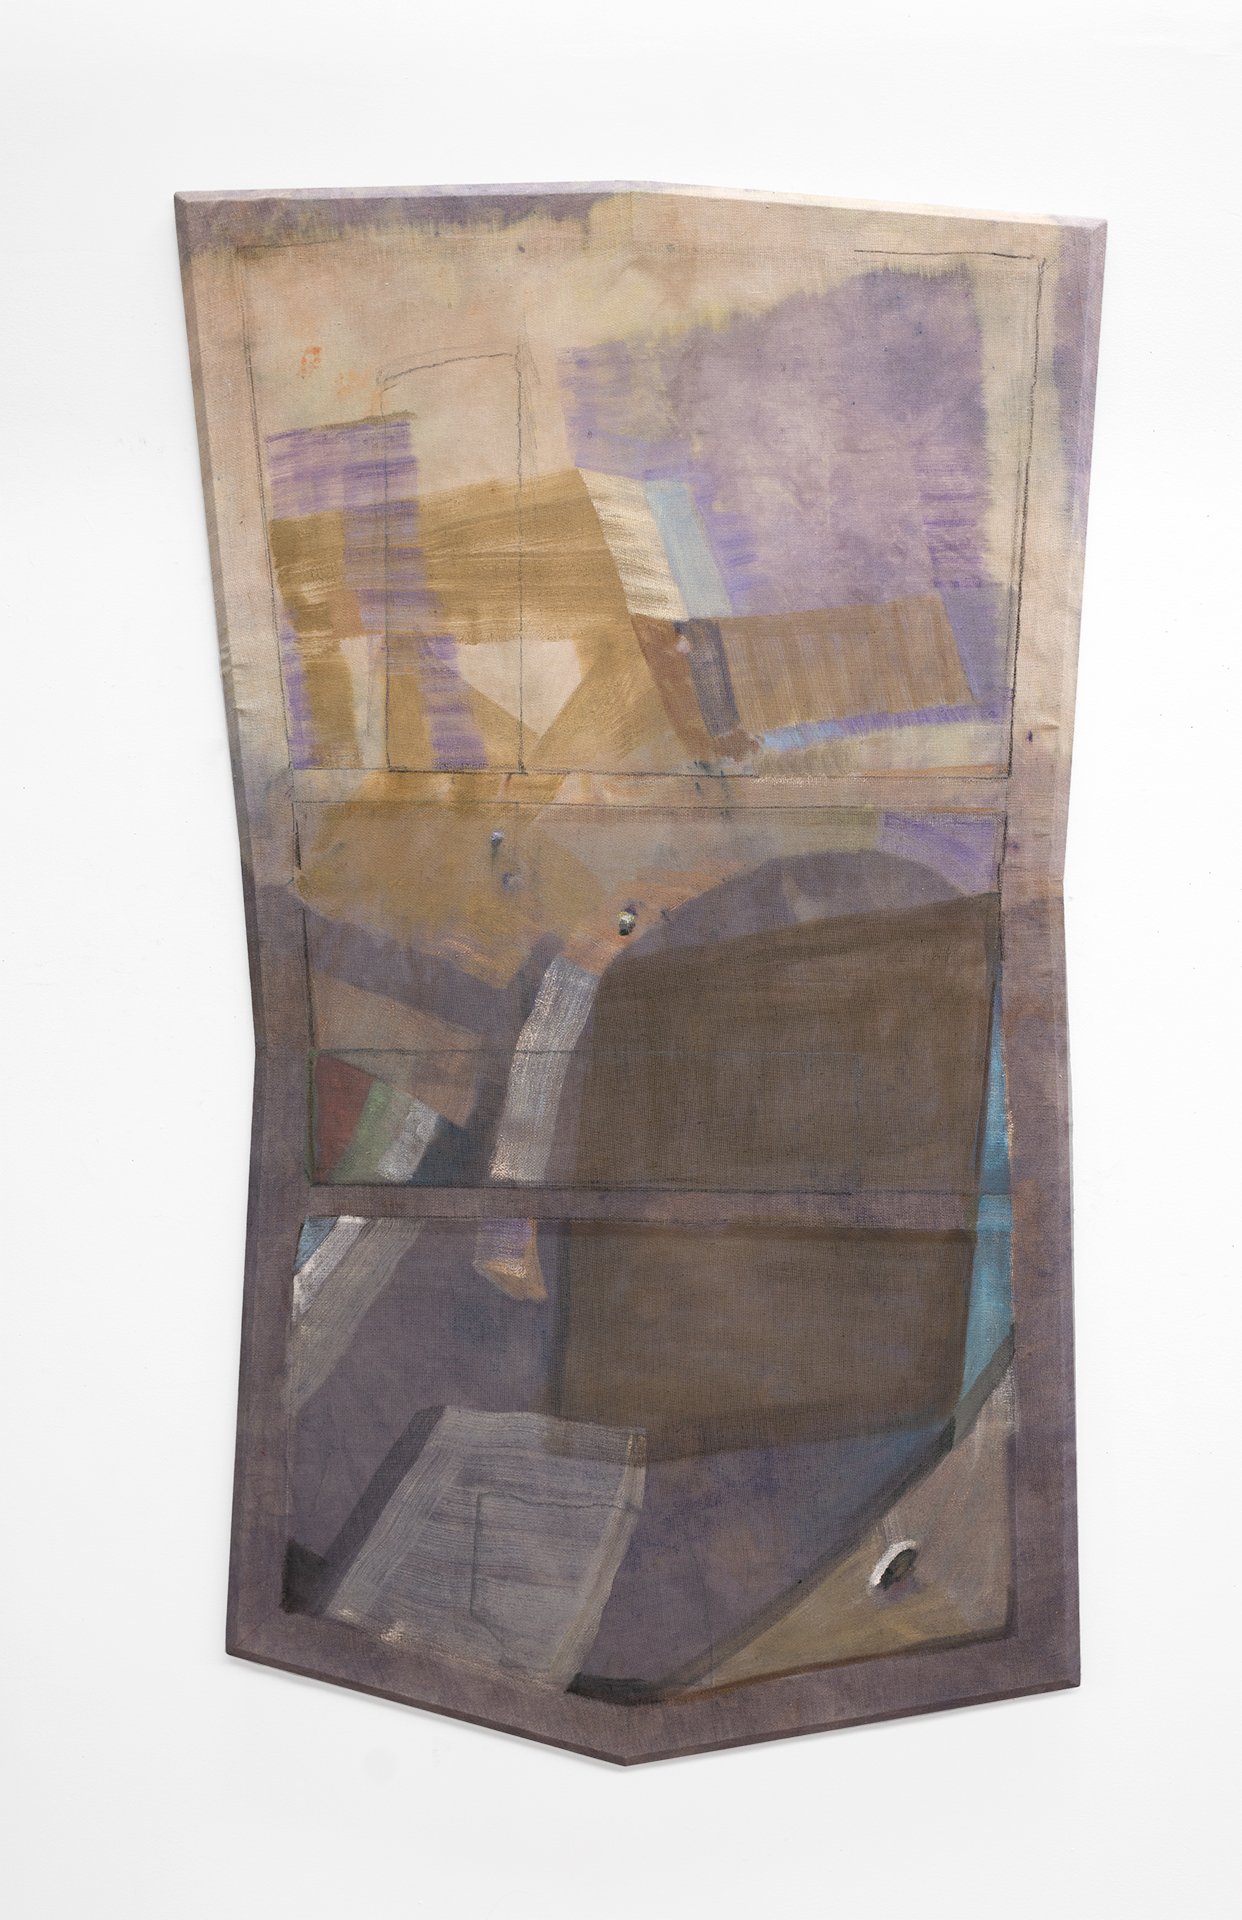  Predicate, 2023. Dye, bleach, graphite, and oil on linen with beveled pine, 70 x 35 x 1 inches (variable dimensions). 